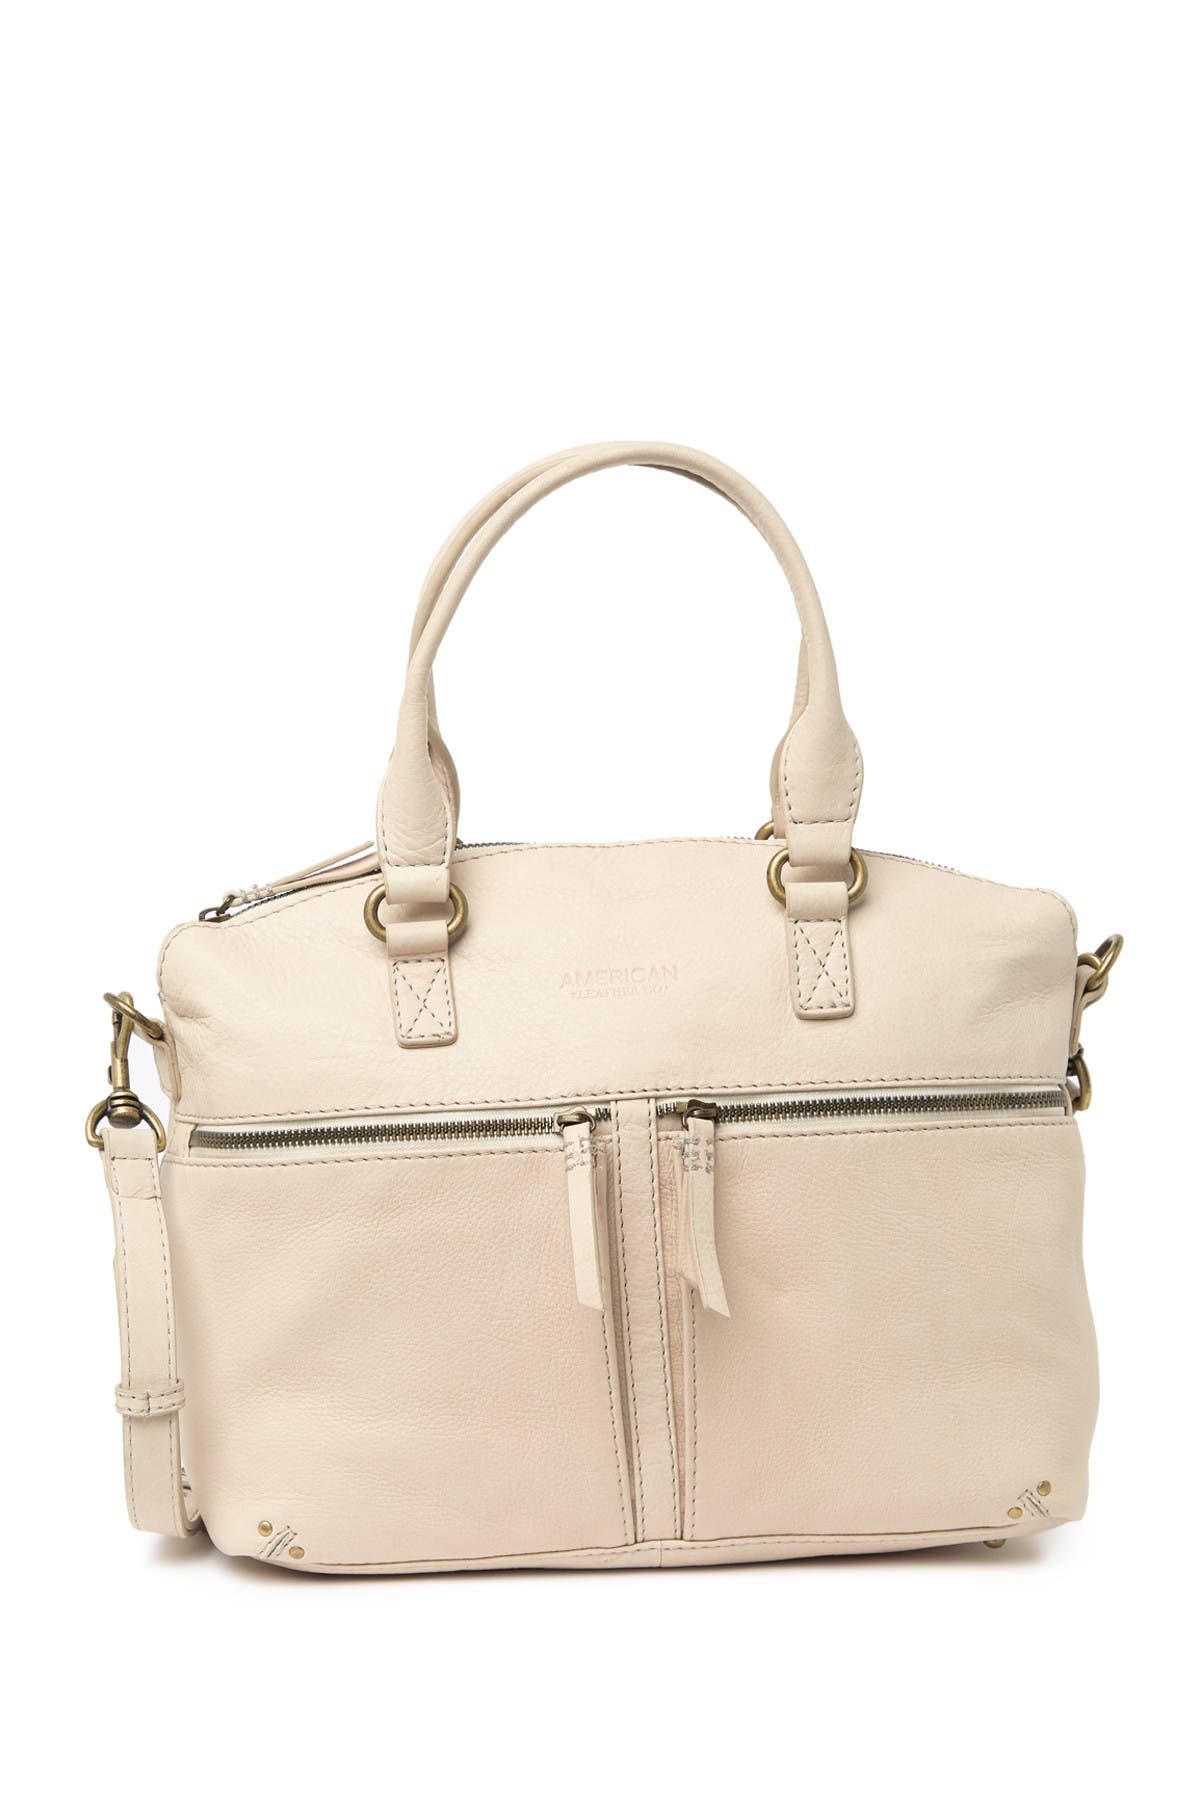 American Leather Co. Hanover Smooth Leather Satchel In Stone Smooth